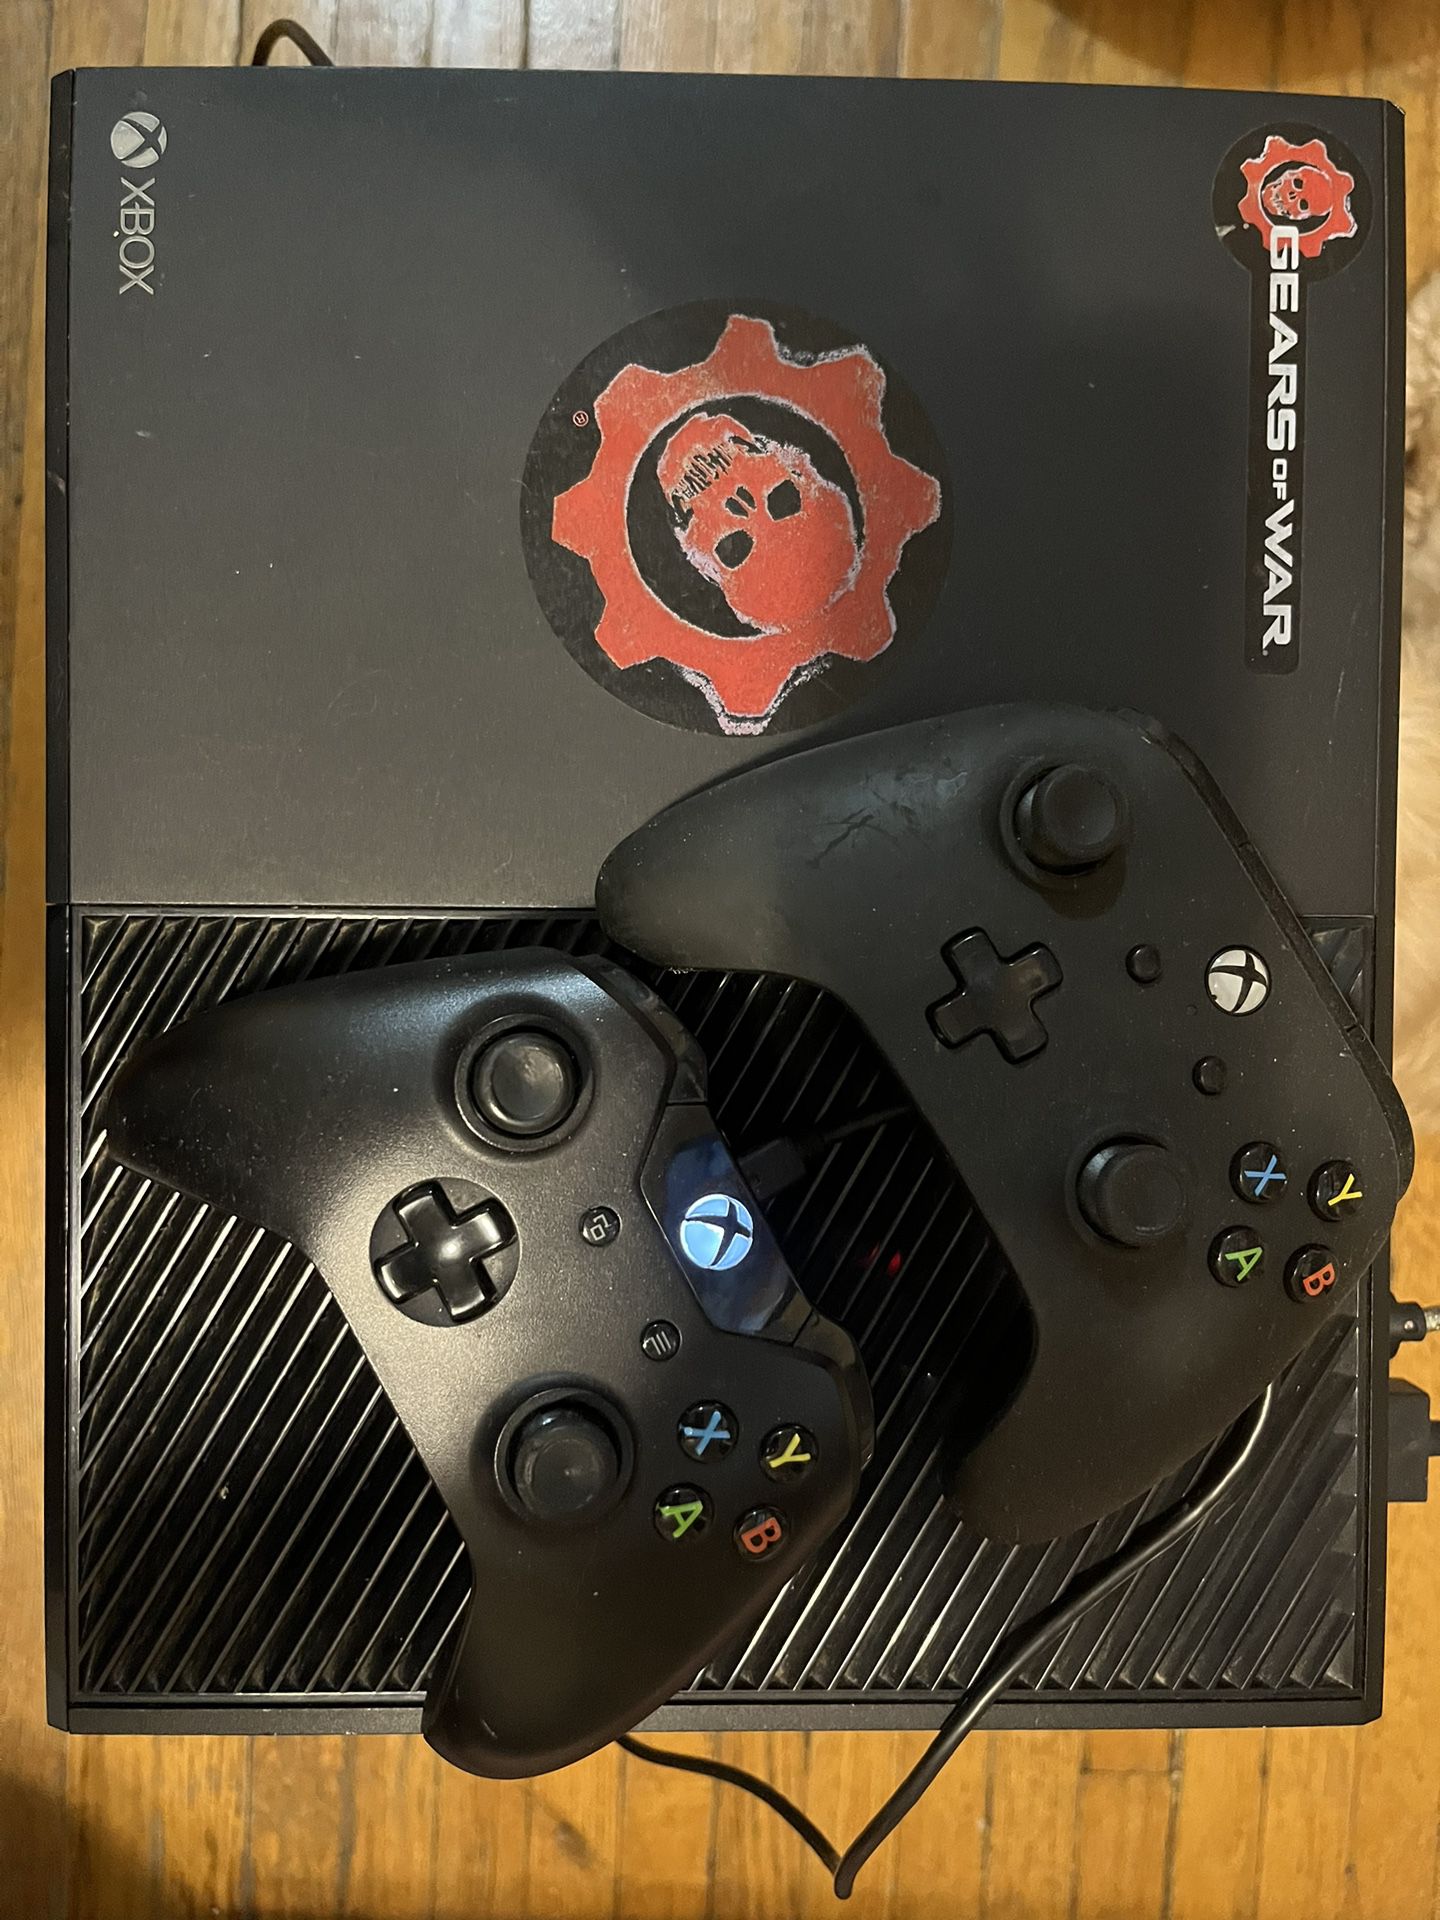 Xbox One Gears of war 